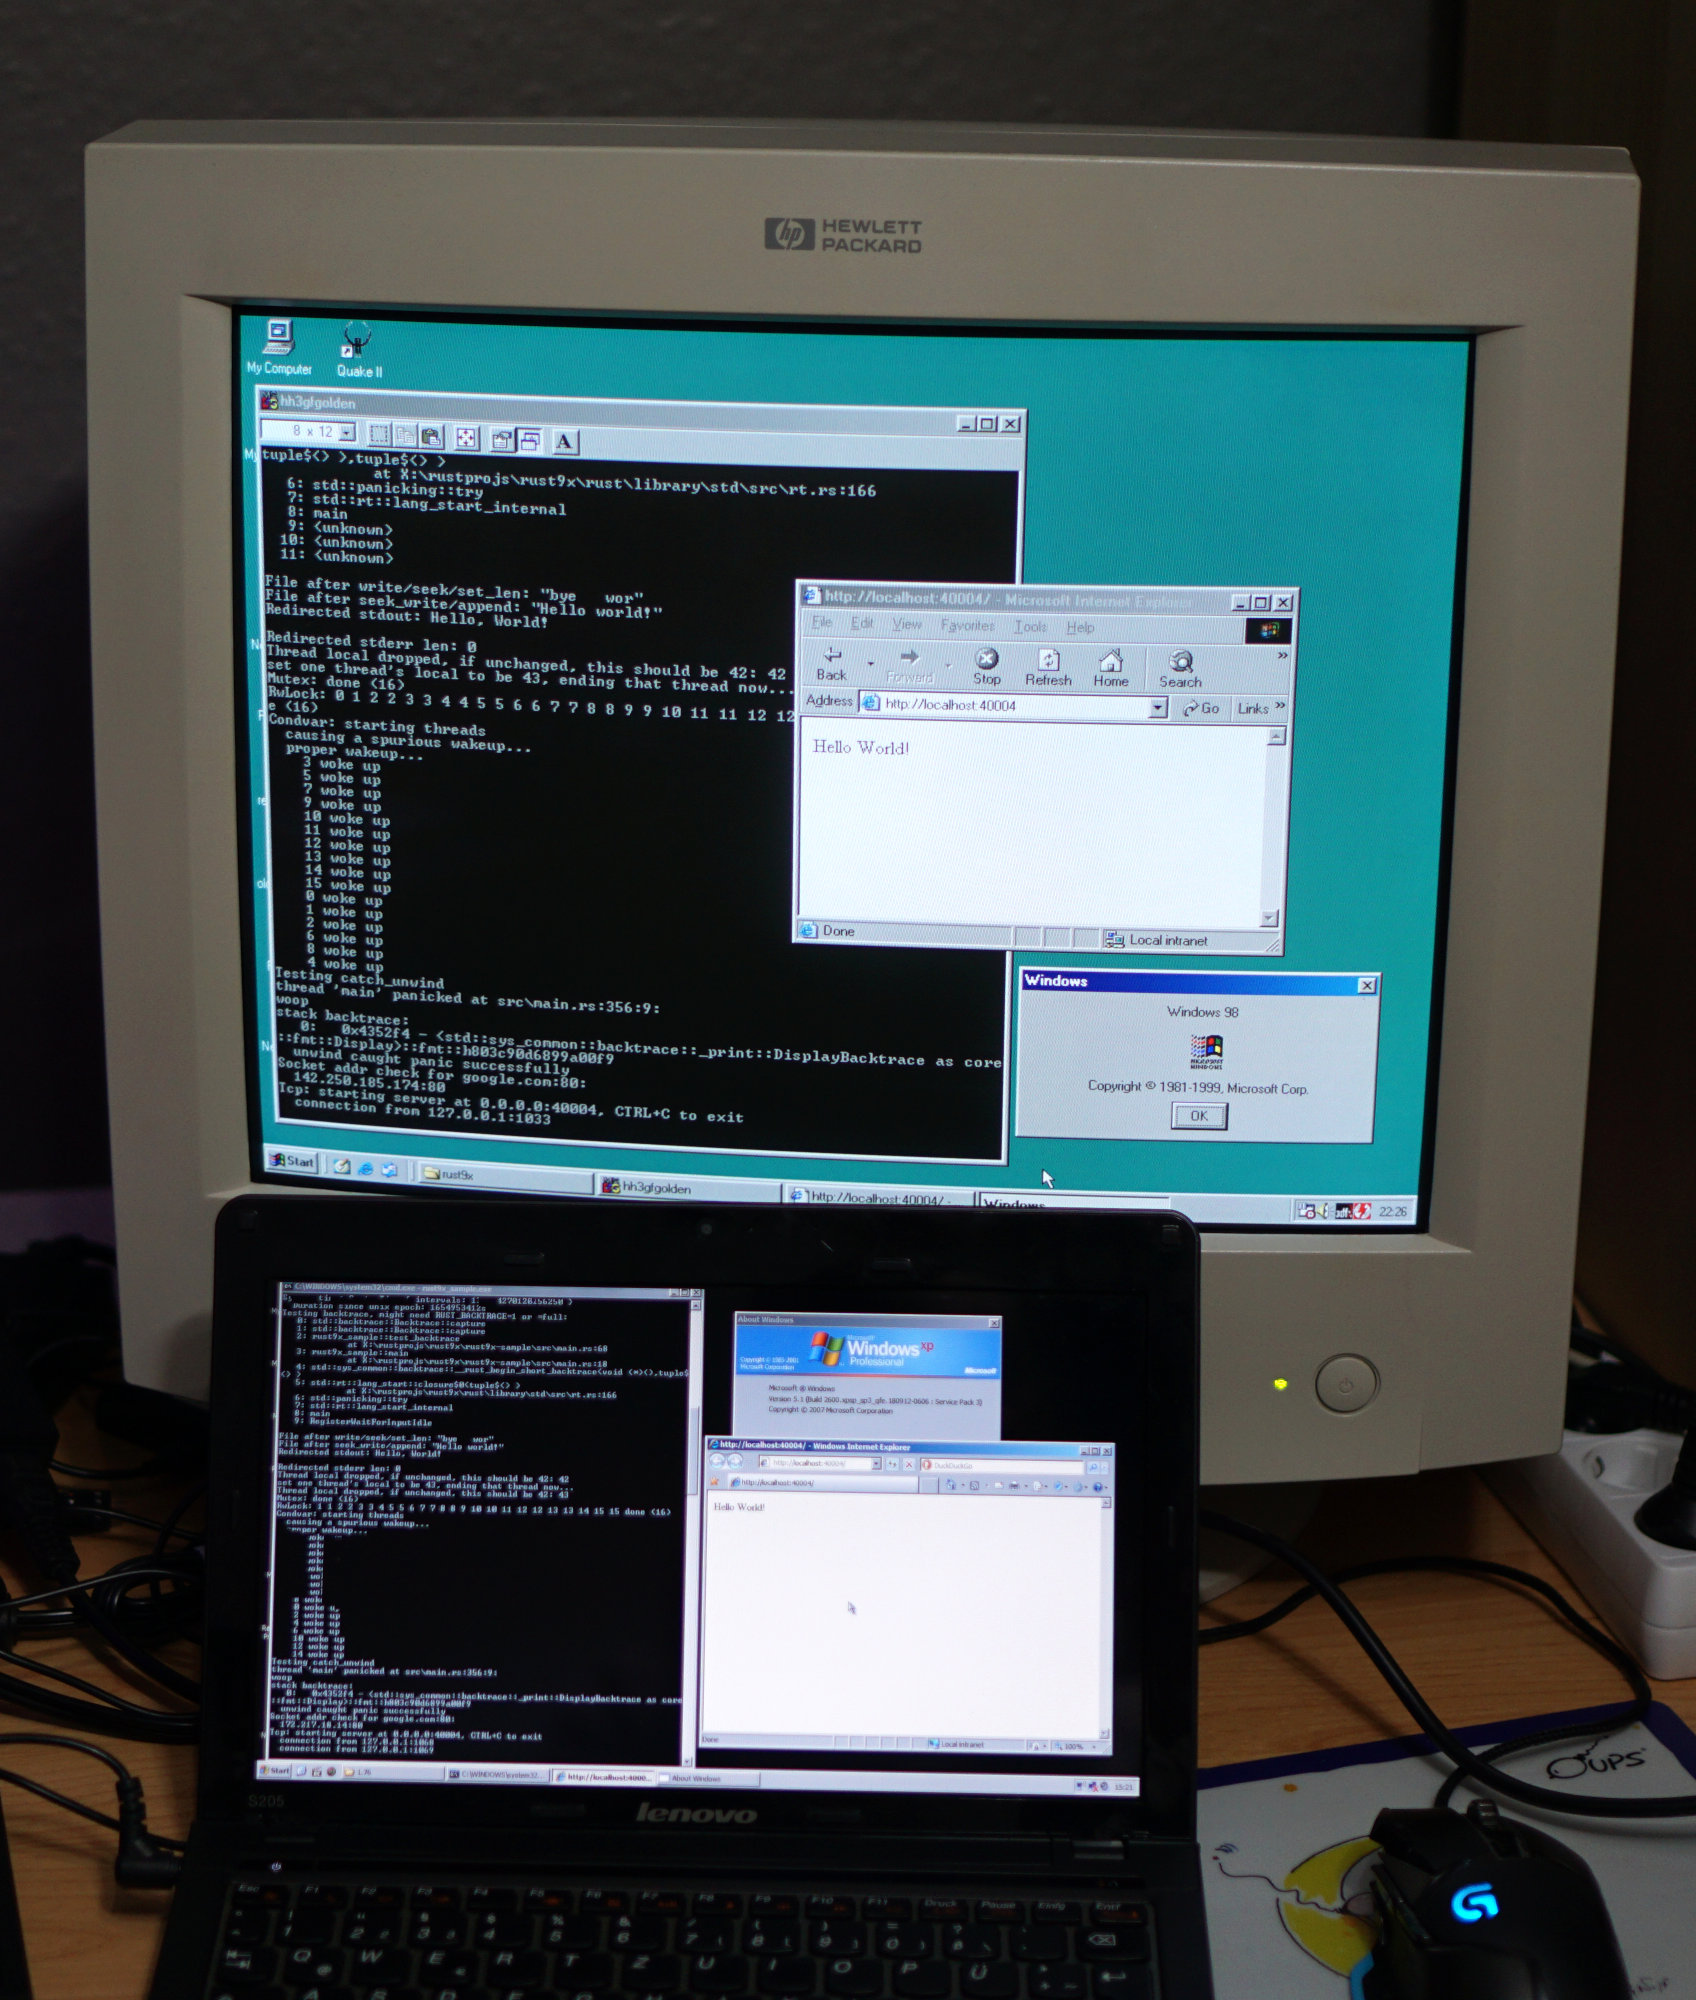 Picture of the sample program running on a Windows 98 SE PC and aWindows XP laptop